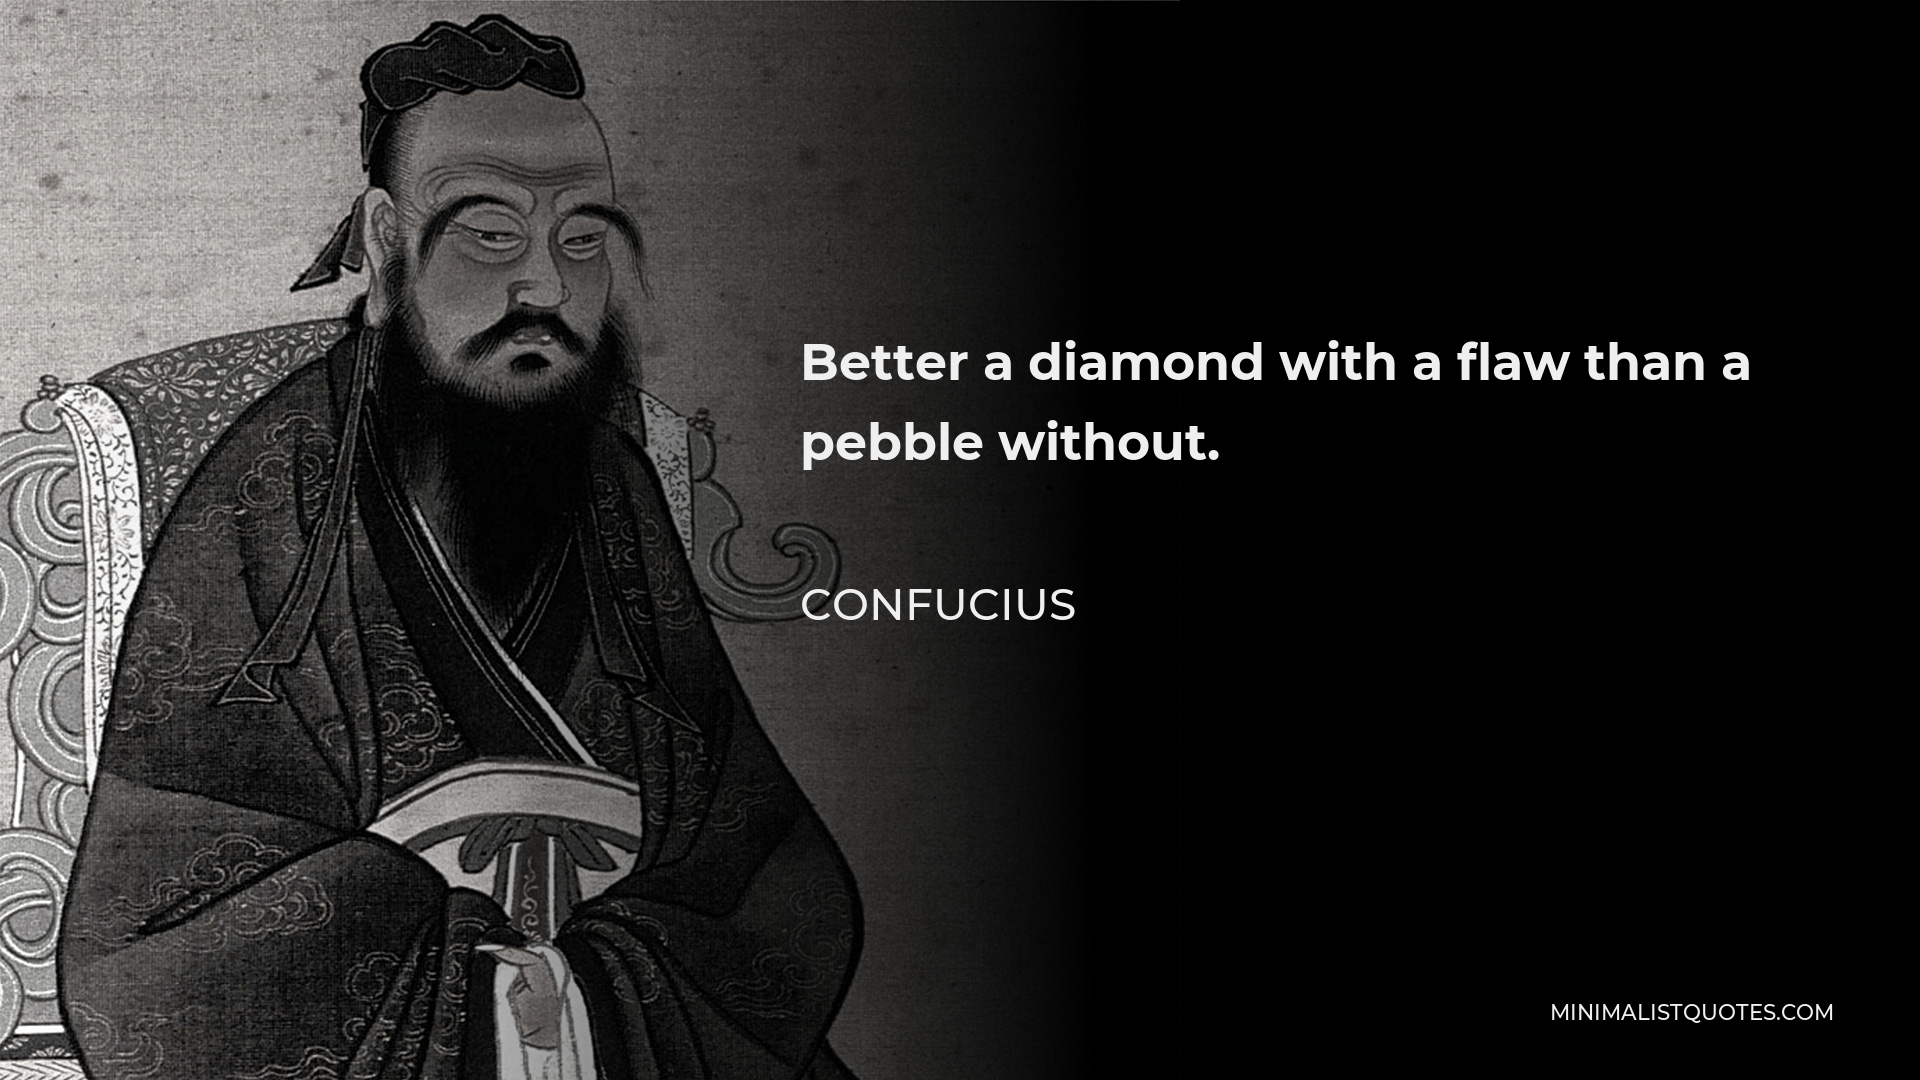 Confucius Quote - Better a diamond with a flaw than a pebble without.